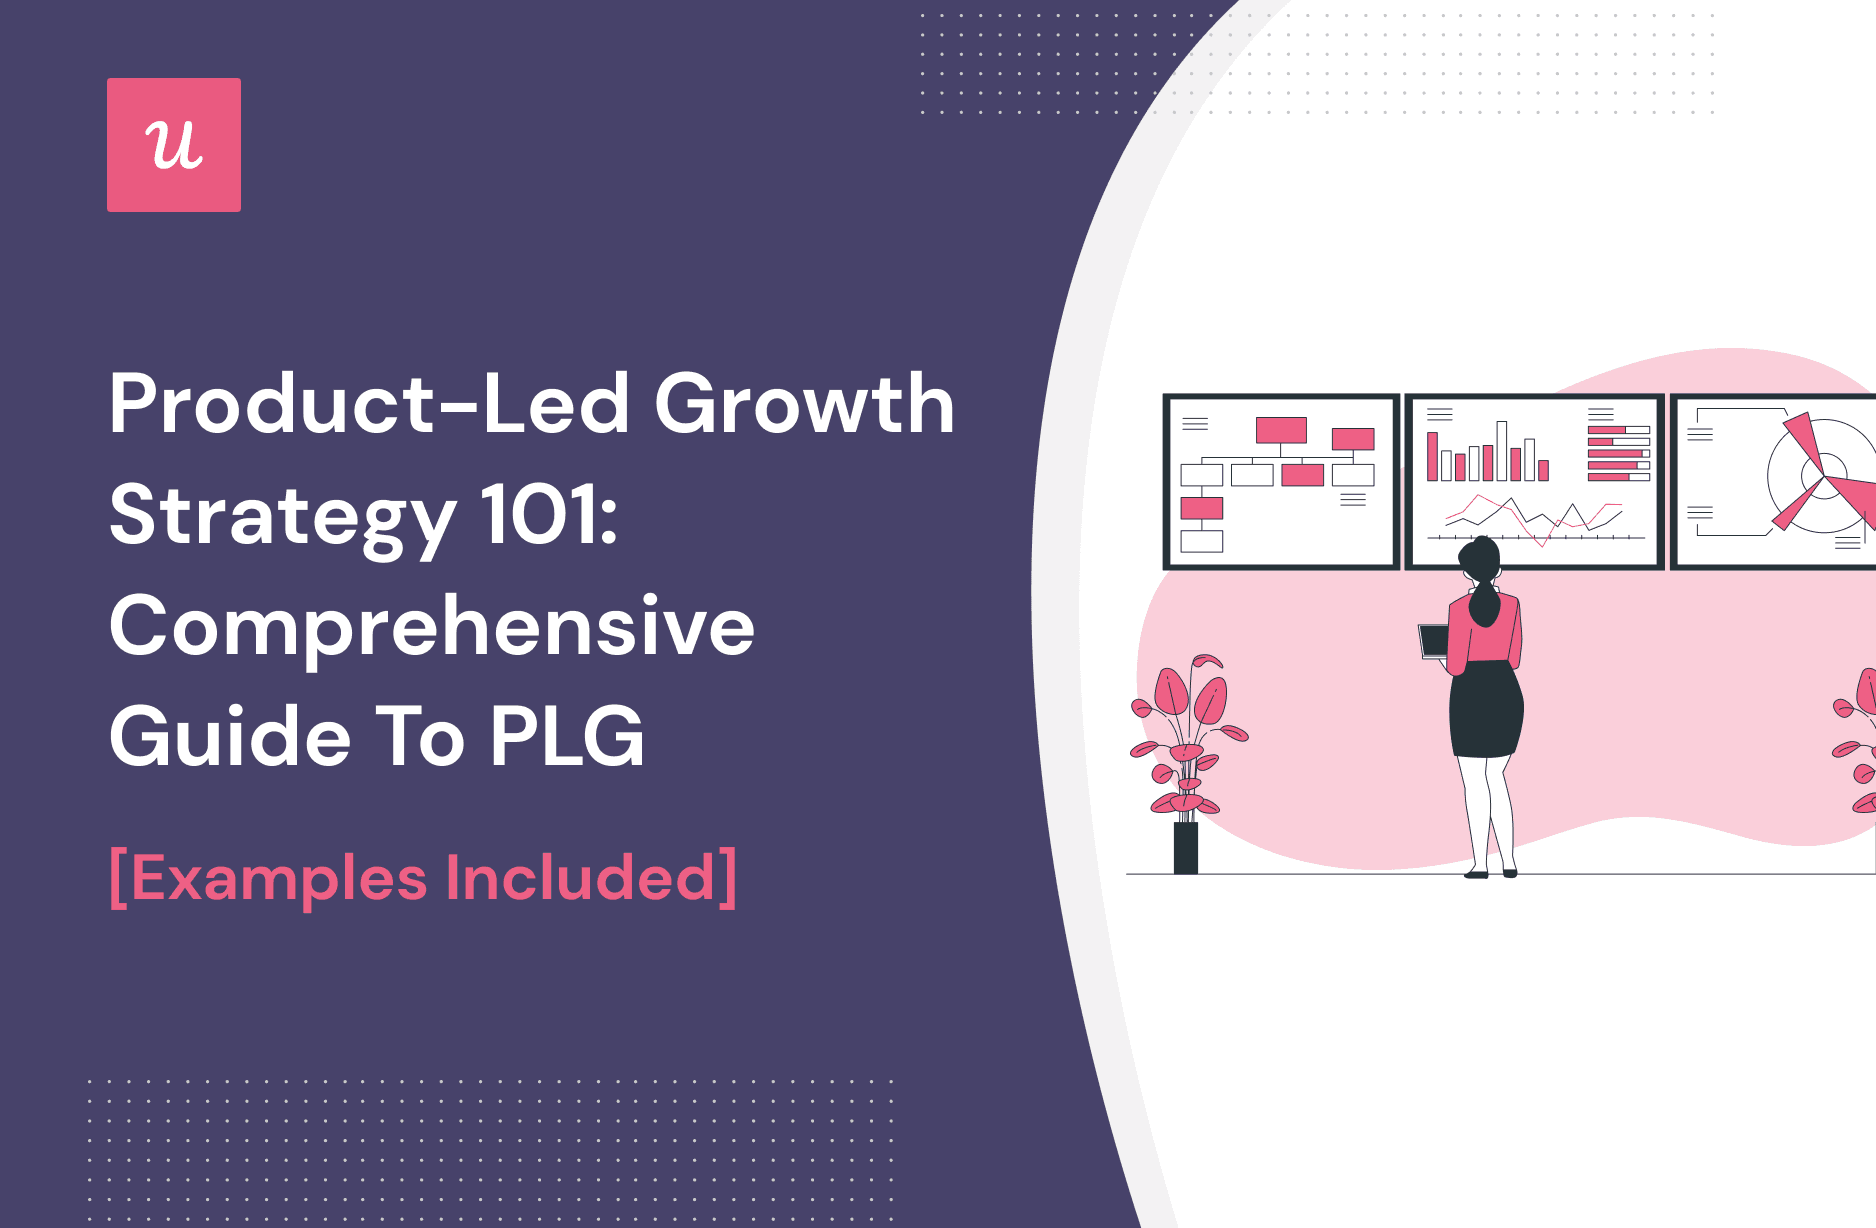 Product Led Growth Strategy 101: Comprehensive Guide to PLG [Examples Included] cover